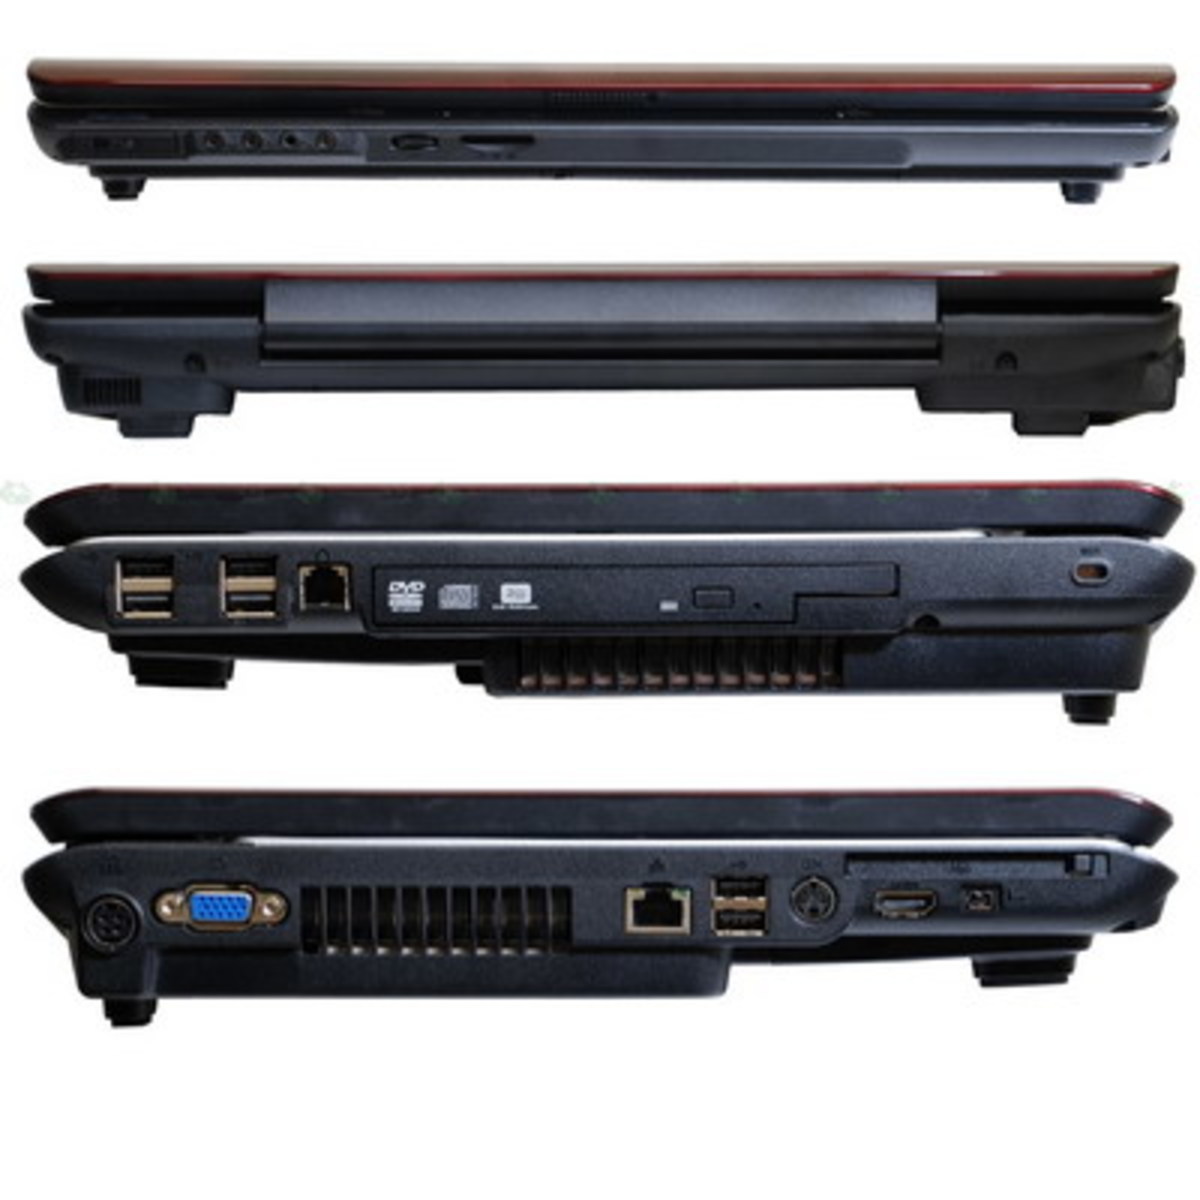 4 views of a Toshiba laptop, note the side vents on the bottom two views. 